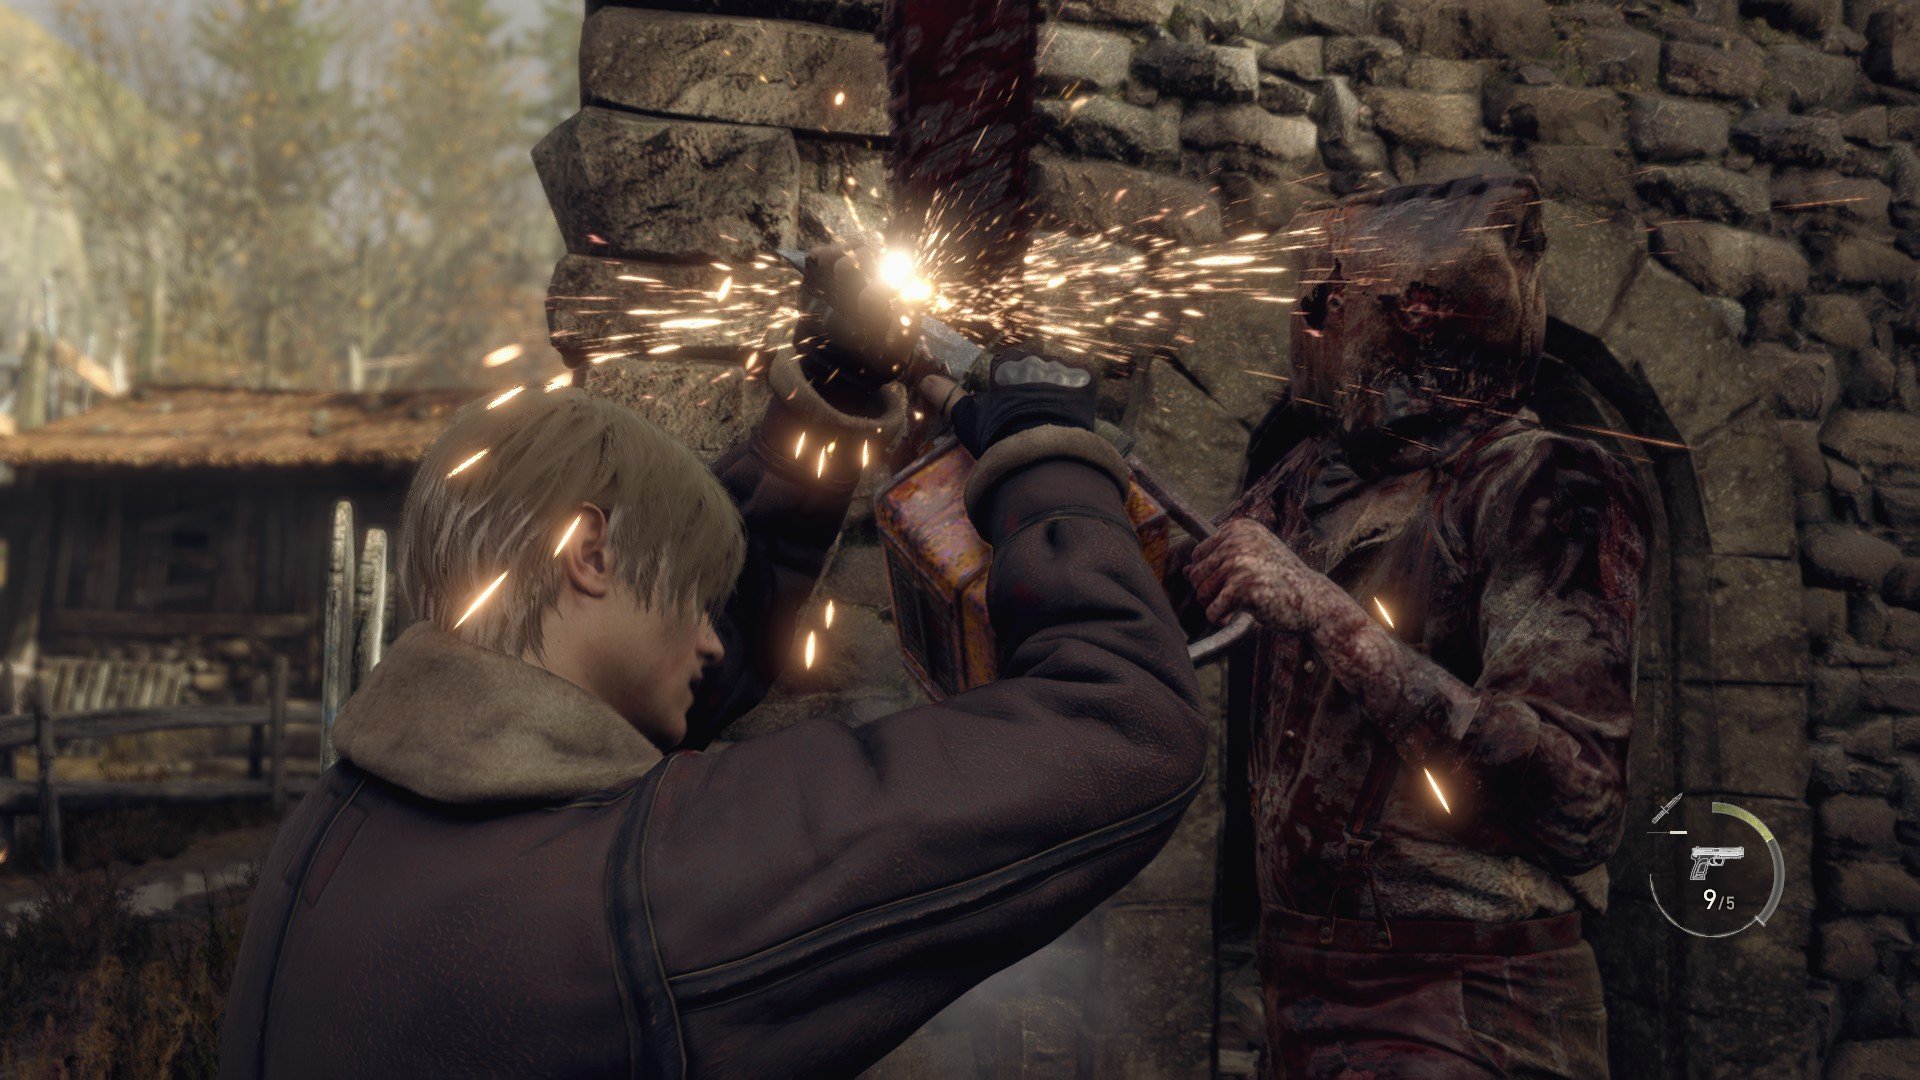 Resident Evil 4: Chainsaw Demo available NOW, Page 21